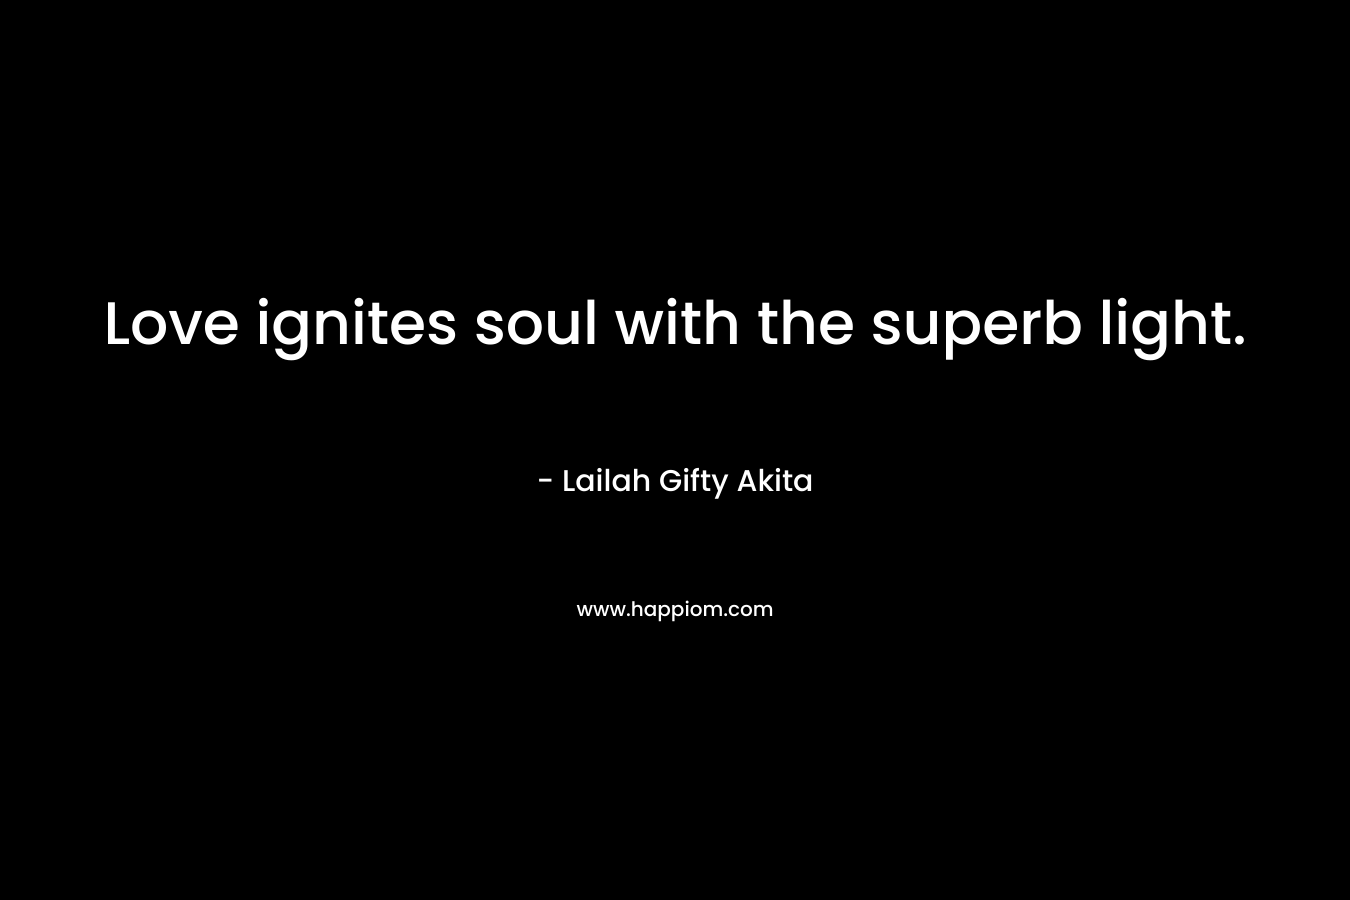 Love ignites soul with the superb light. – Lailah Gifty Akita